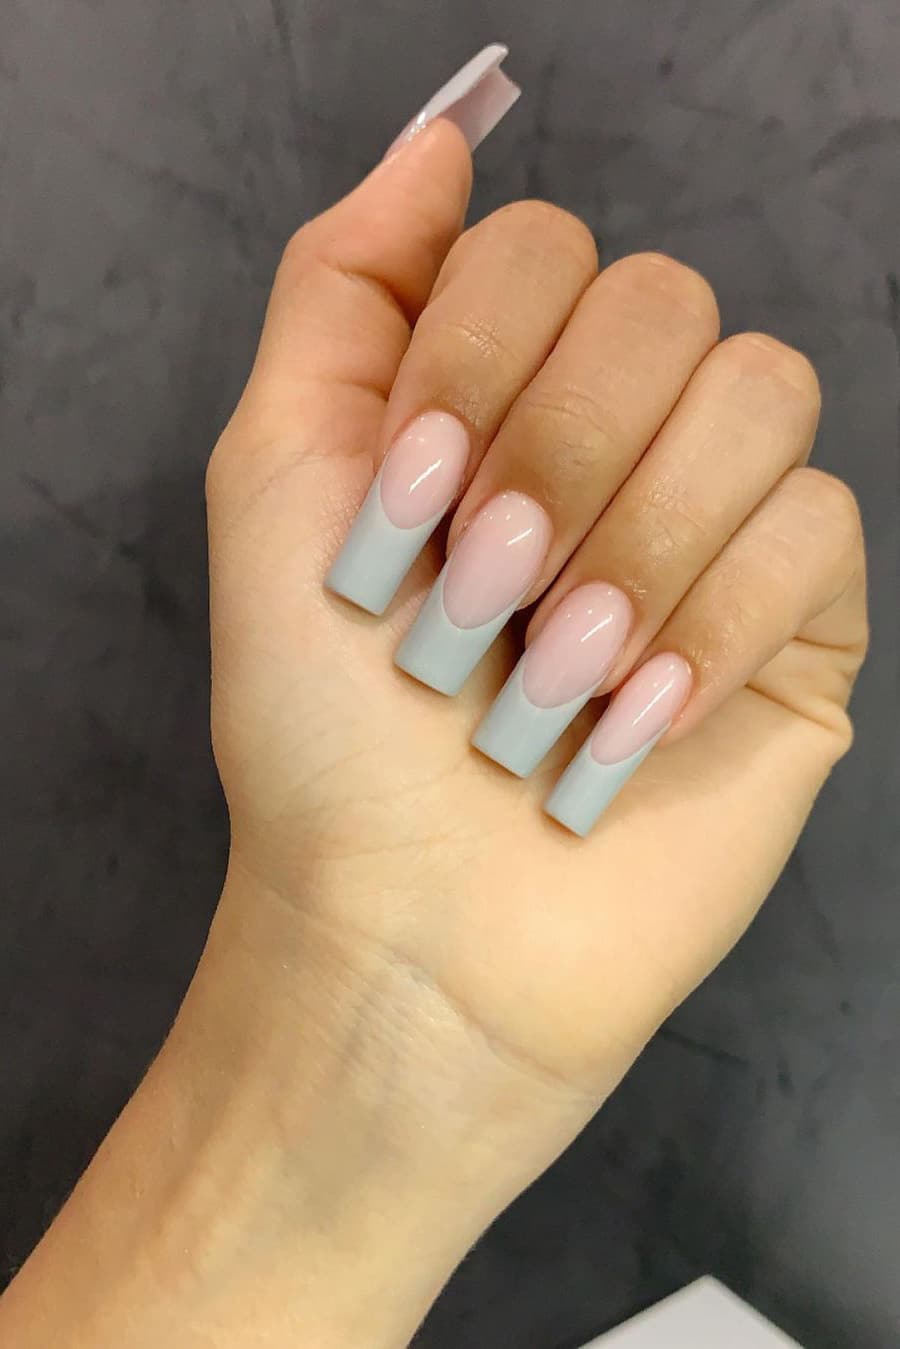 Gray French nails